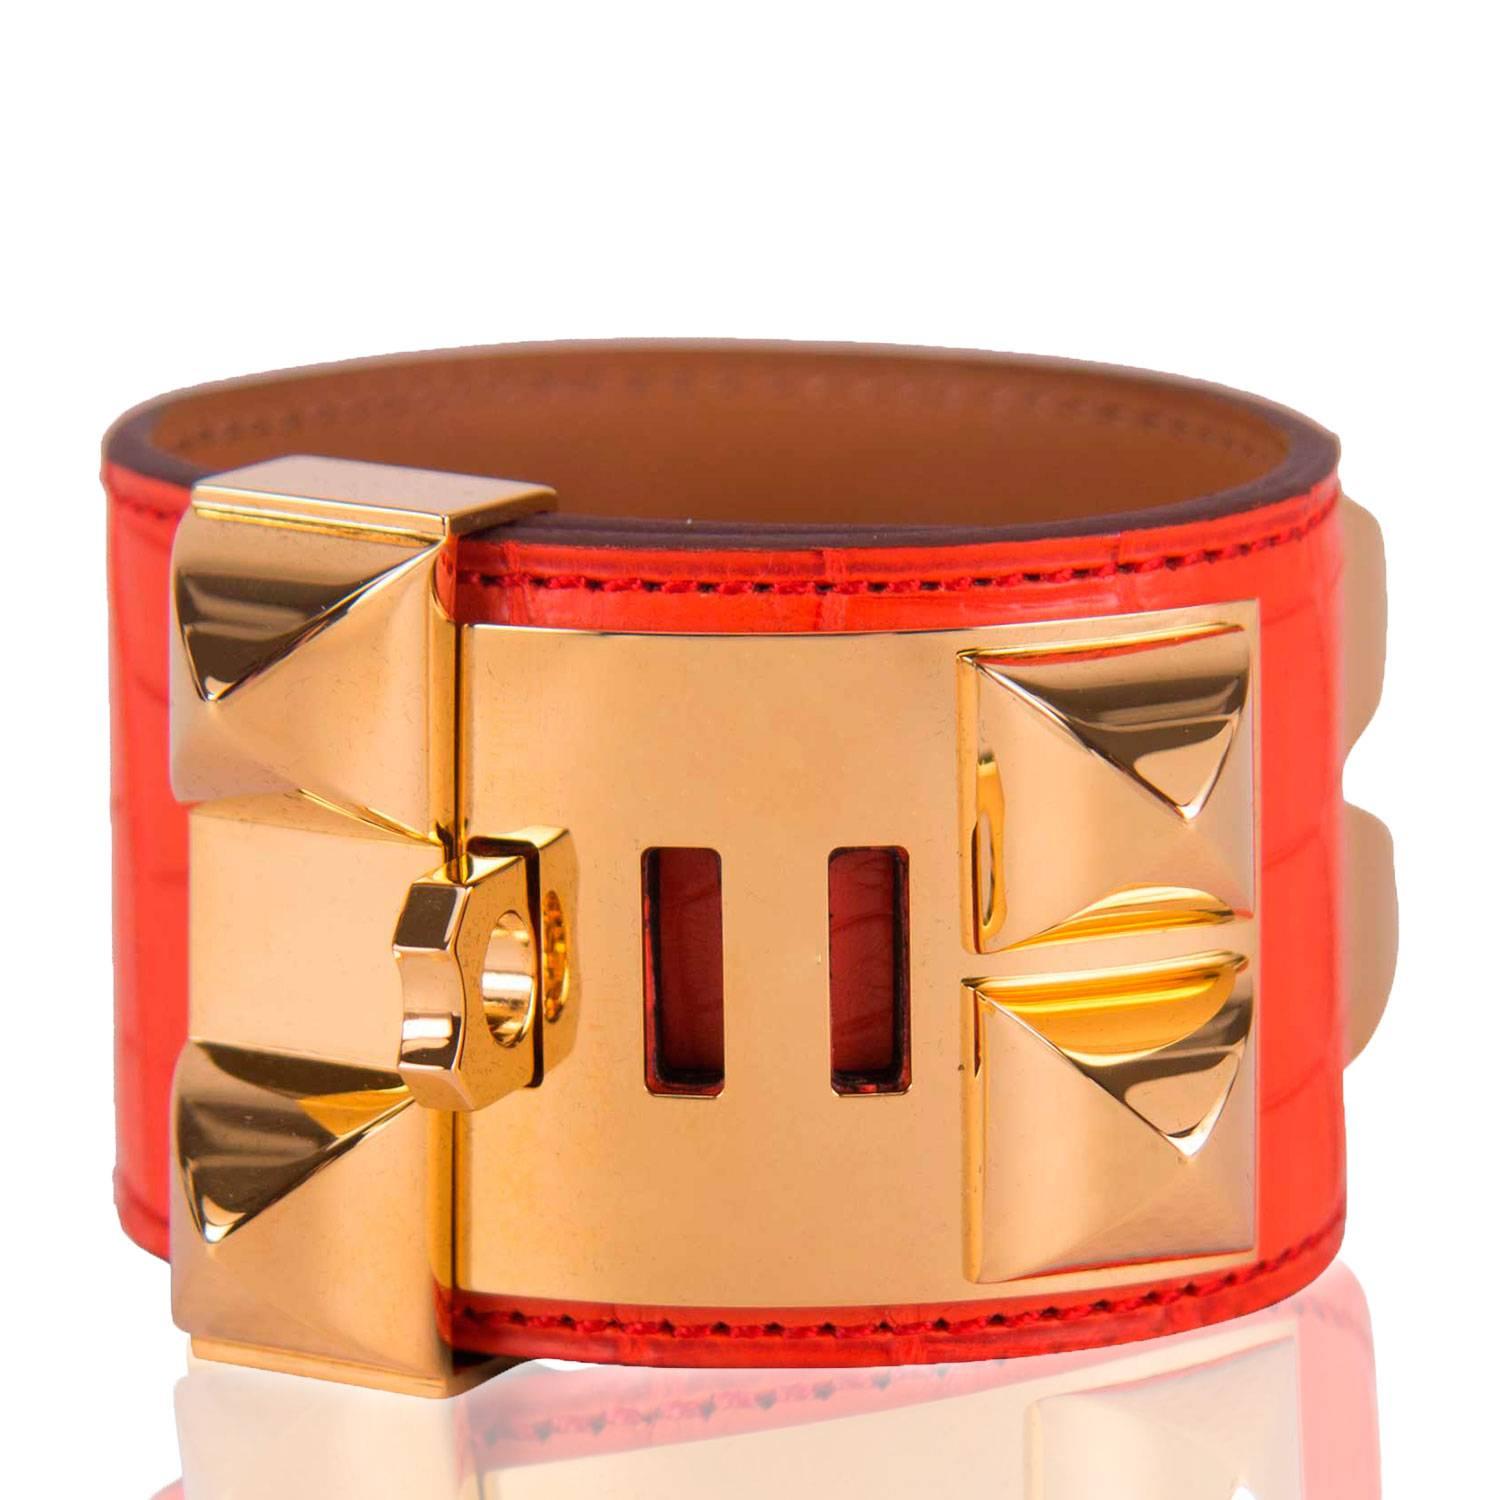 Hermes Bracelet Collier de Chien V2 Alligator Mississippiensis Orange Poppy Gold Hardware 2015.

Pre-owned and never used.

Bought it in Hermes store in 2015.

Size; S, Small.

Color; Orange Poppy.

Model; Collier de Chien